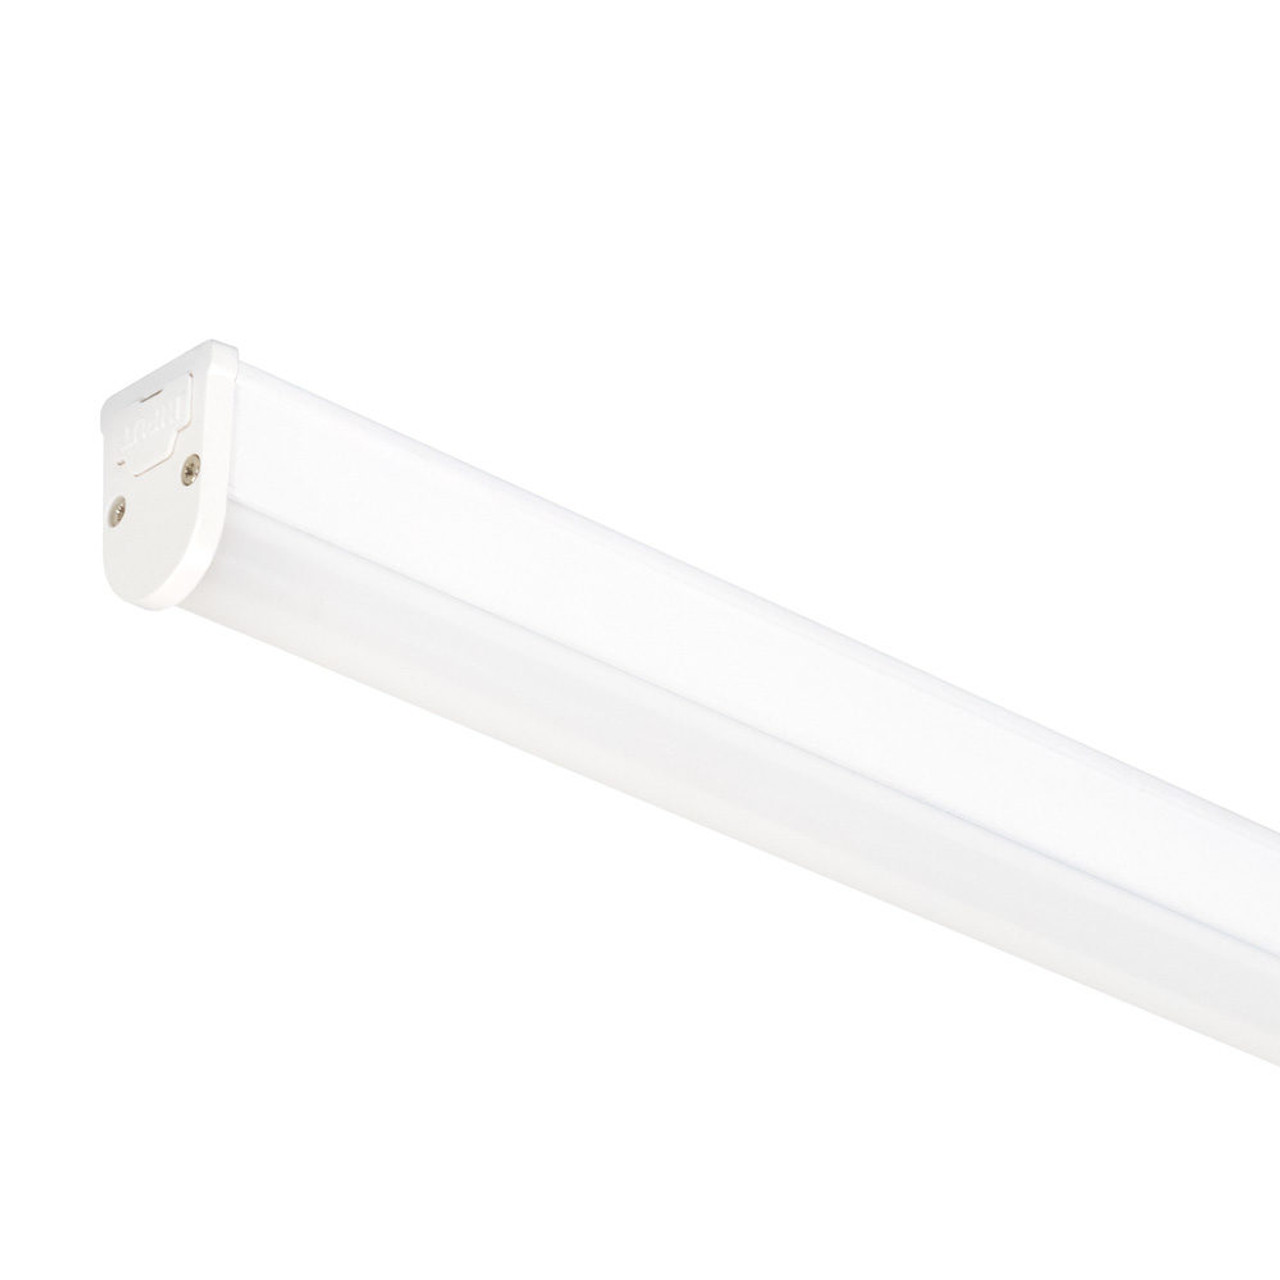 JESCO LIGHTING SG250-60-SWC-WH 60 Inch LED Linkable Rigid Linear with Adjustable Color Temperature